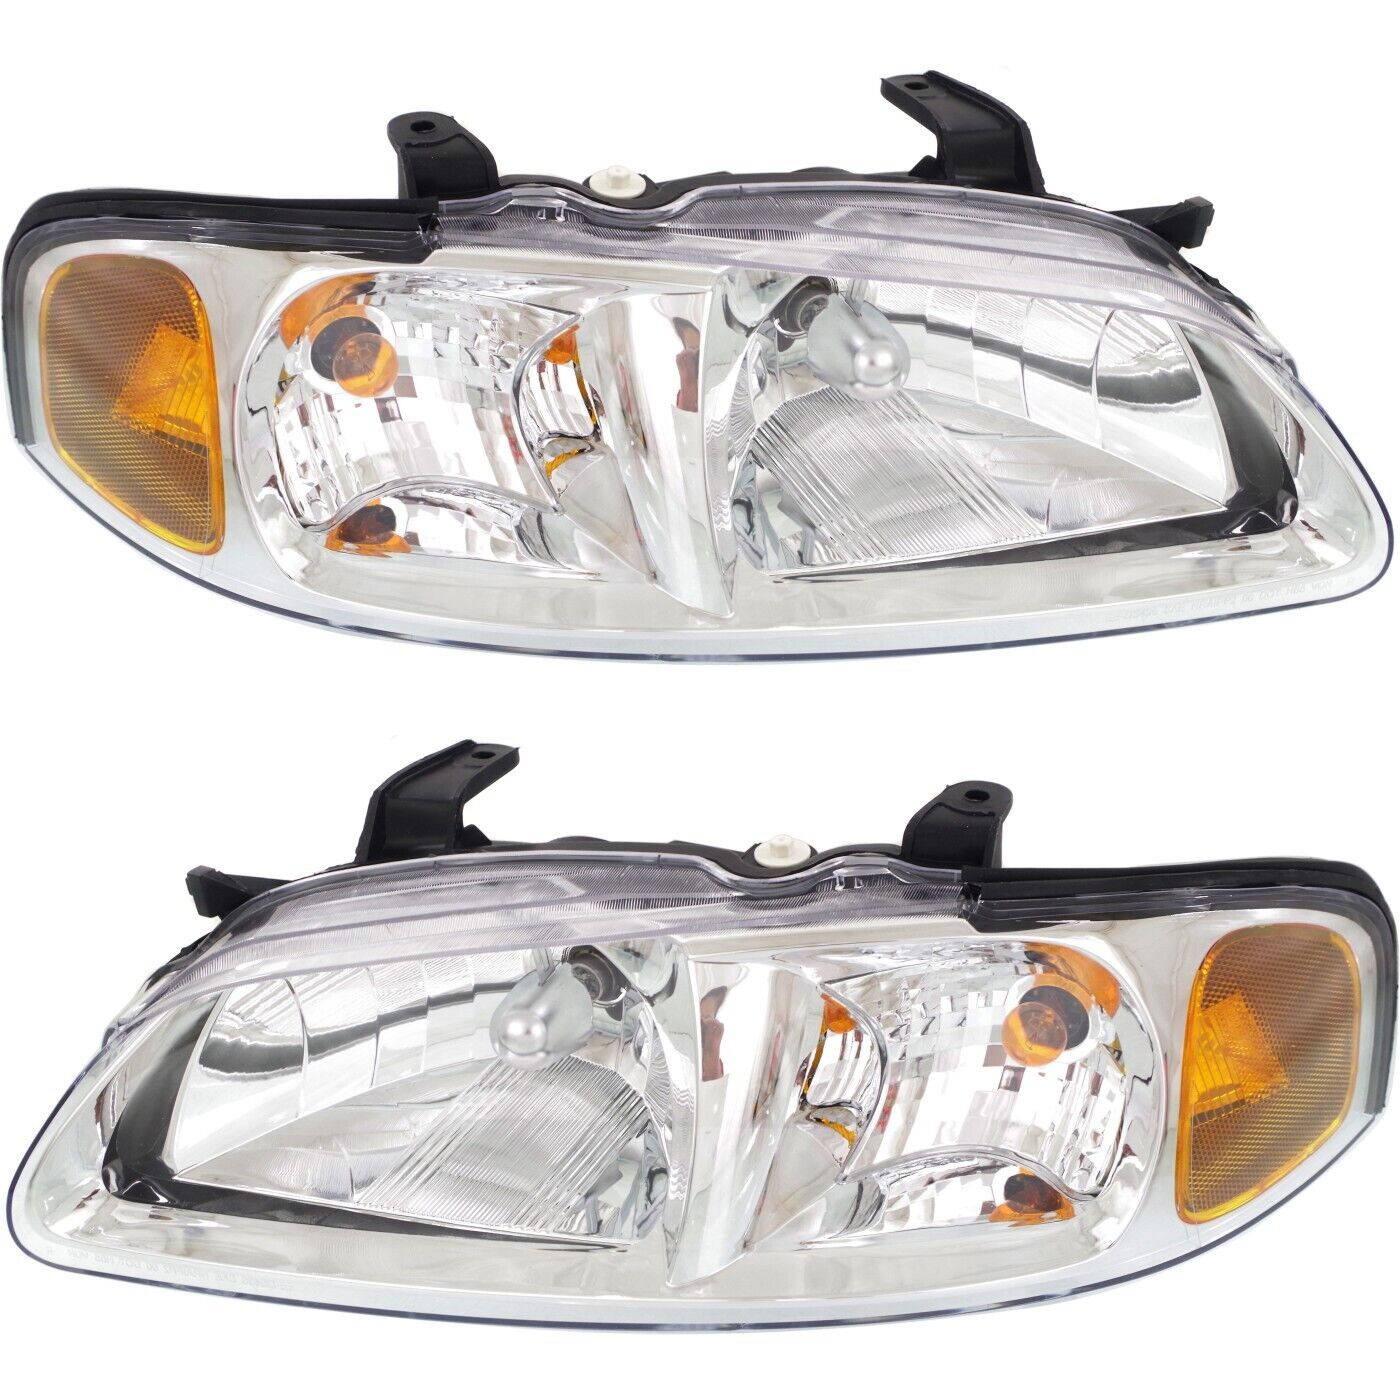 Headlight Set For 2000-2001 Nissan Sentra Left and Right With Bulb 2Pc